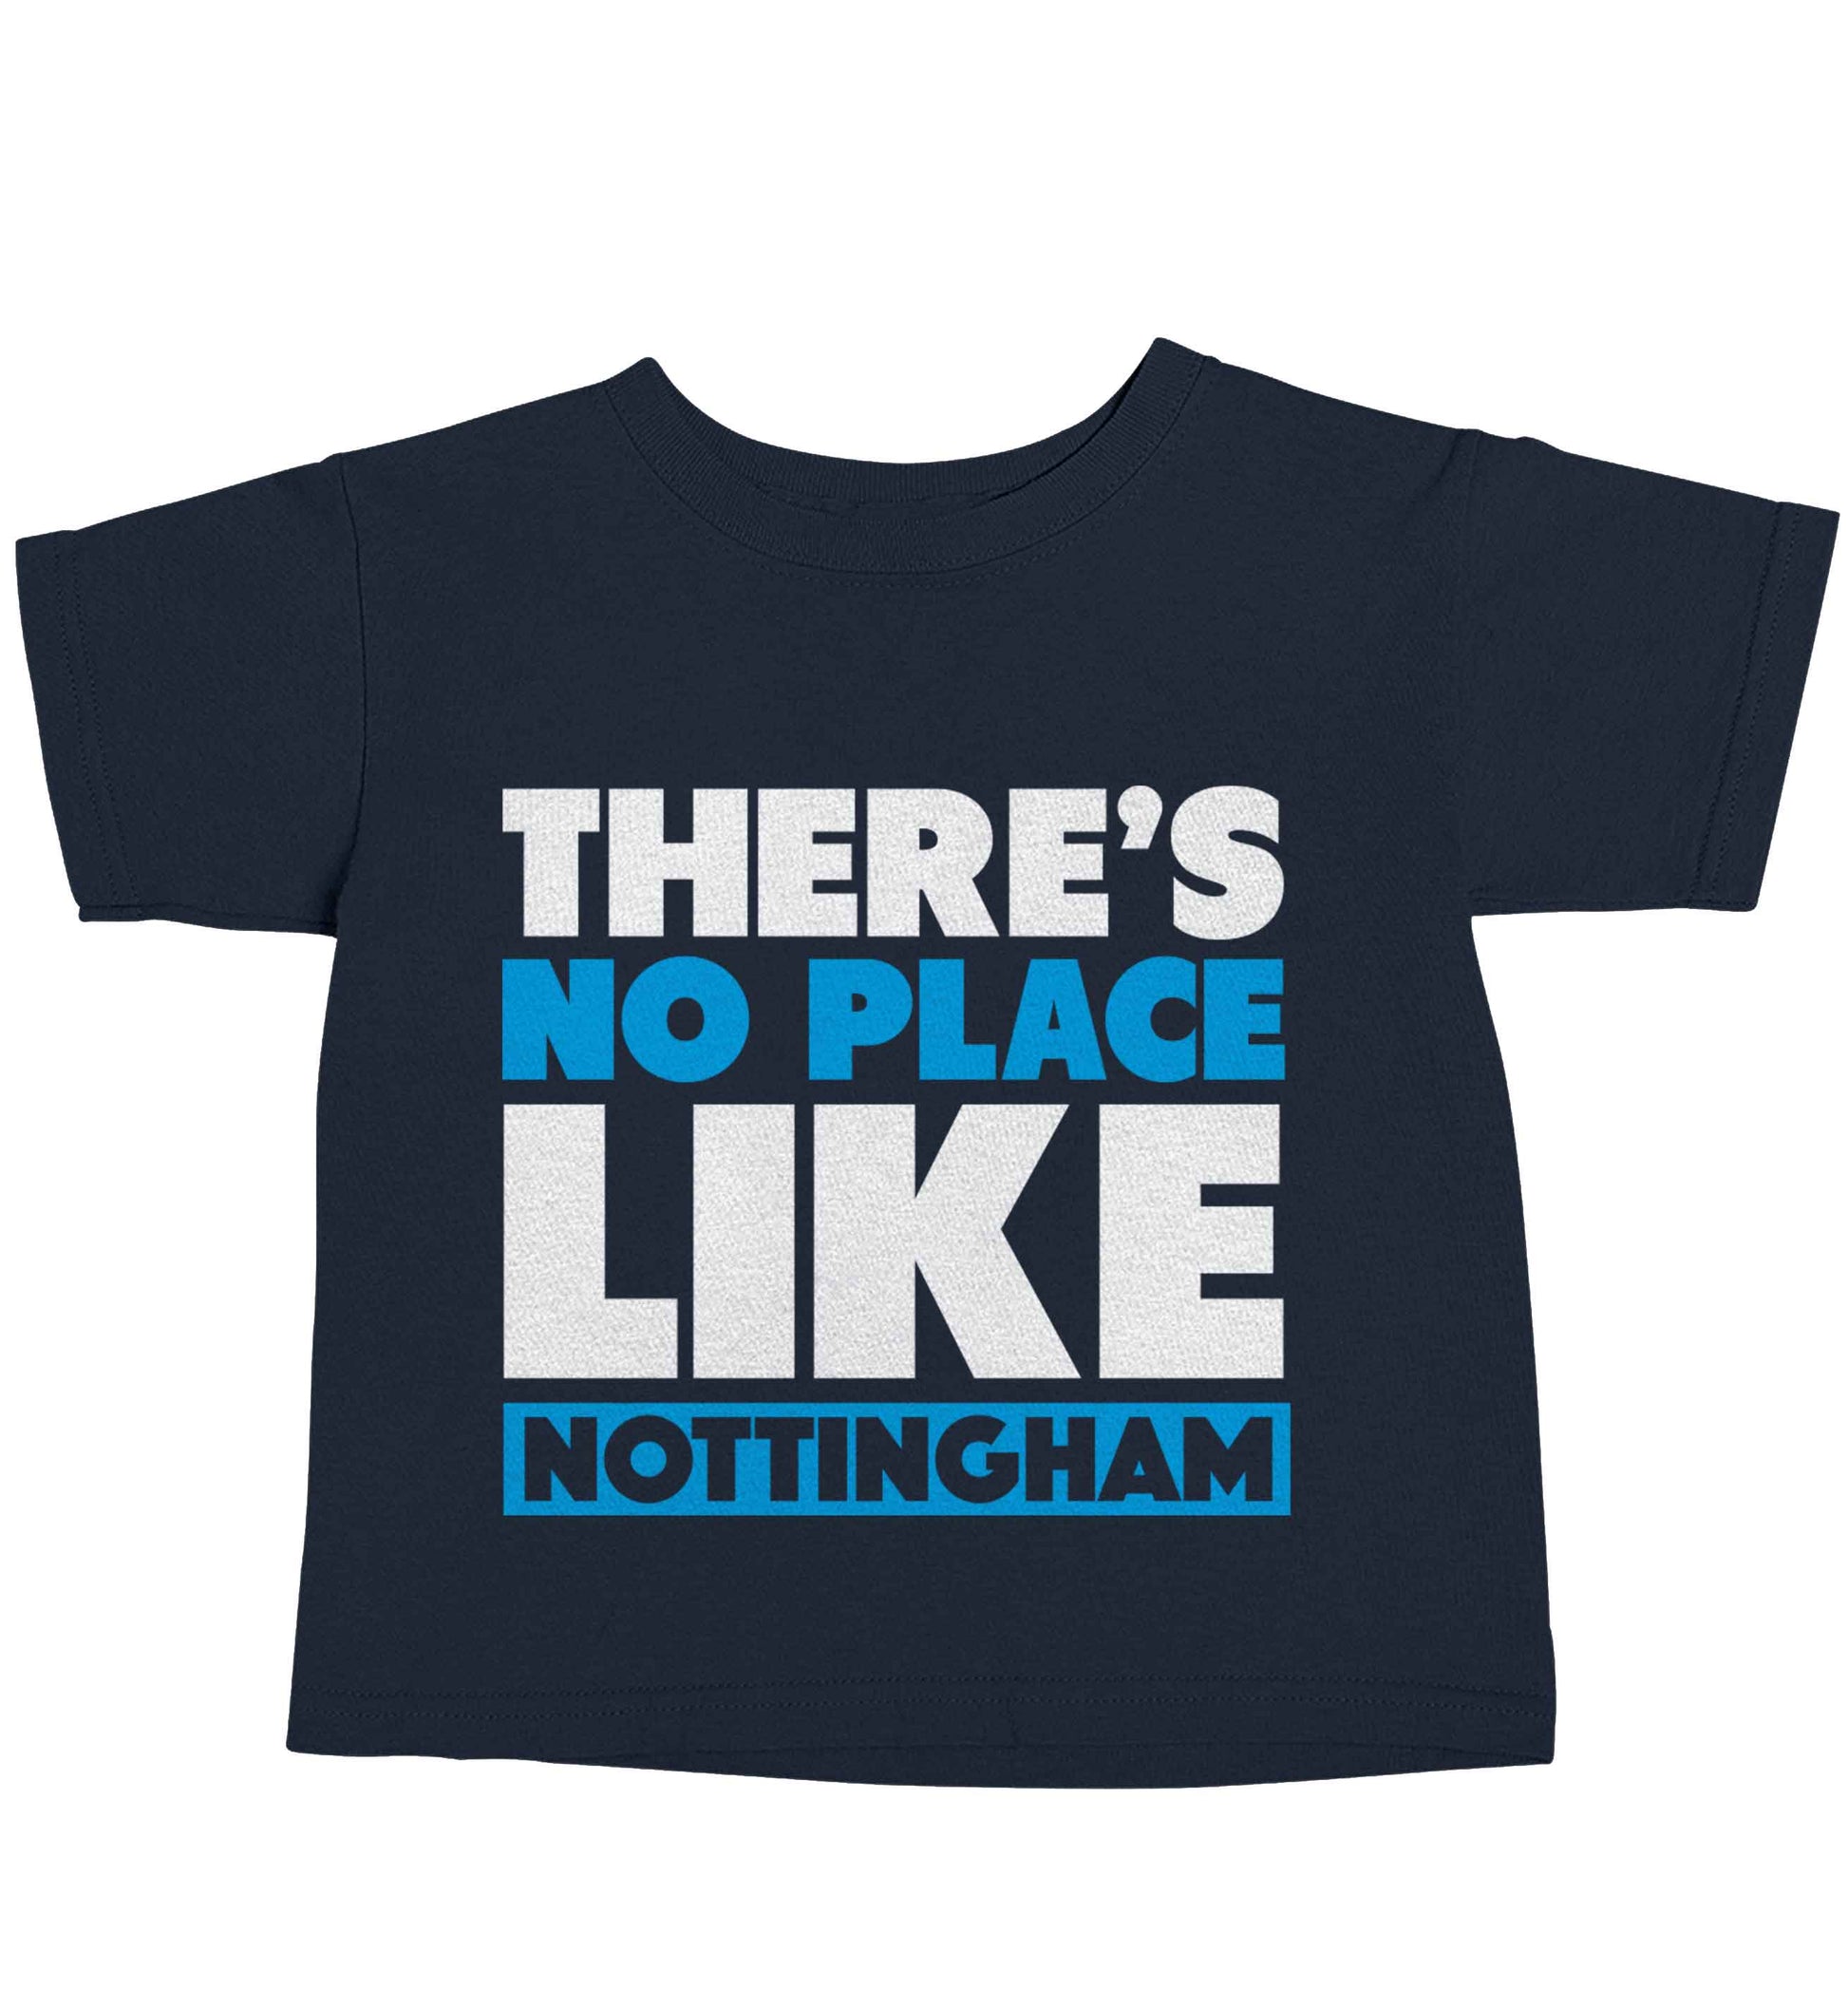 There's no place like Nottingham navy baby toddler Tshirt 2 Years